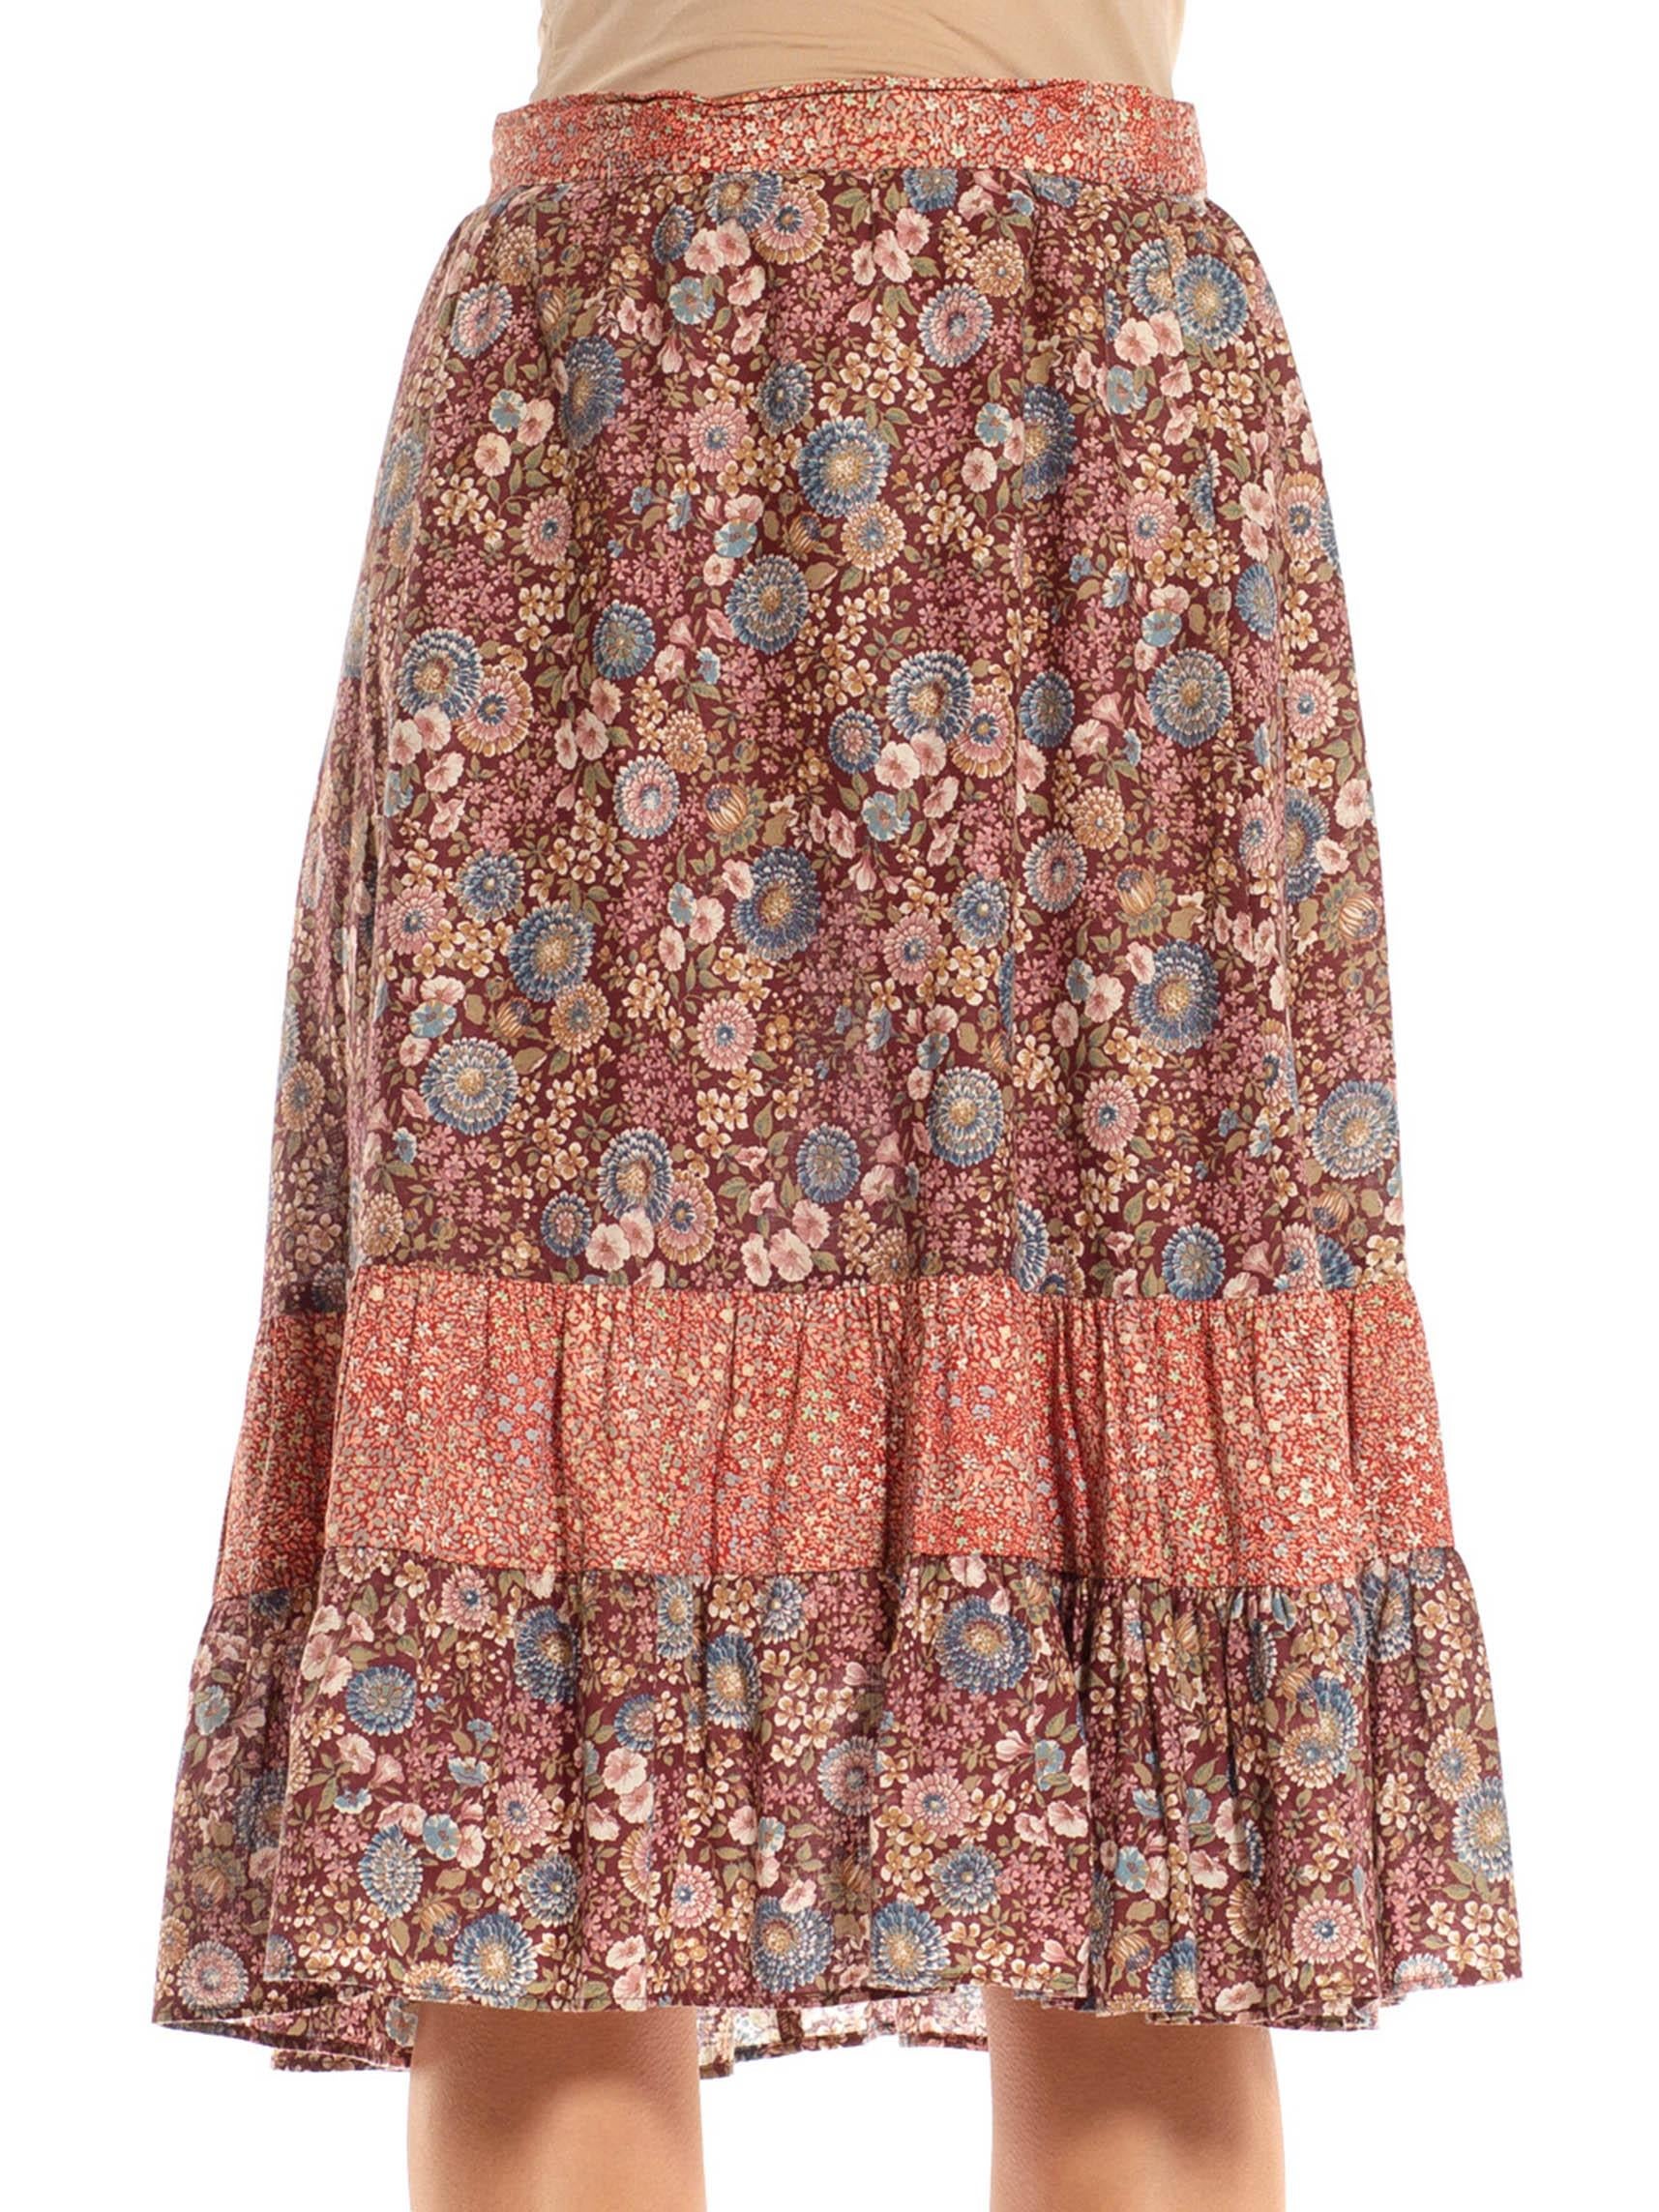 Women's 1970S Burgundy & Dusty Pink Cotton Ditsy Floral Print Mix Skirt For Sale